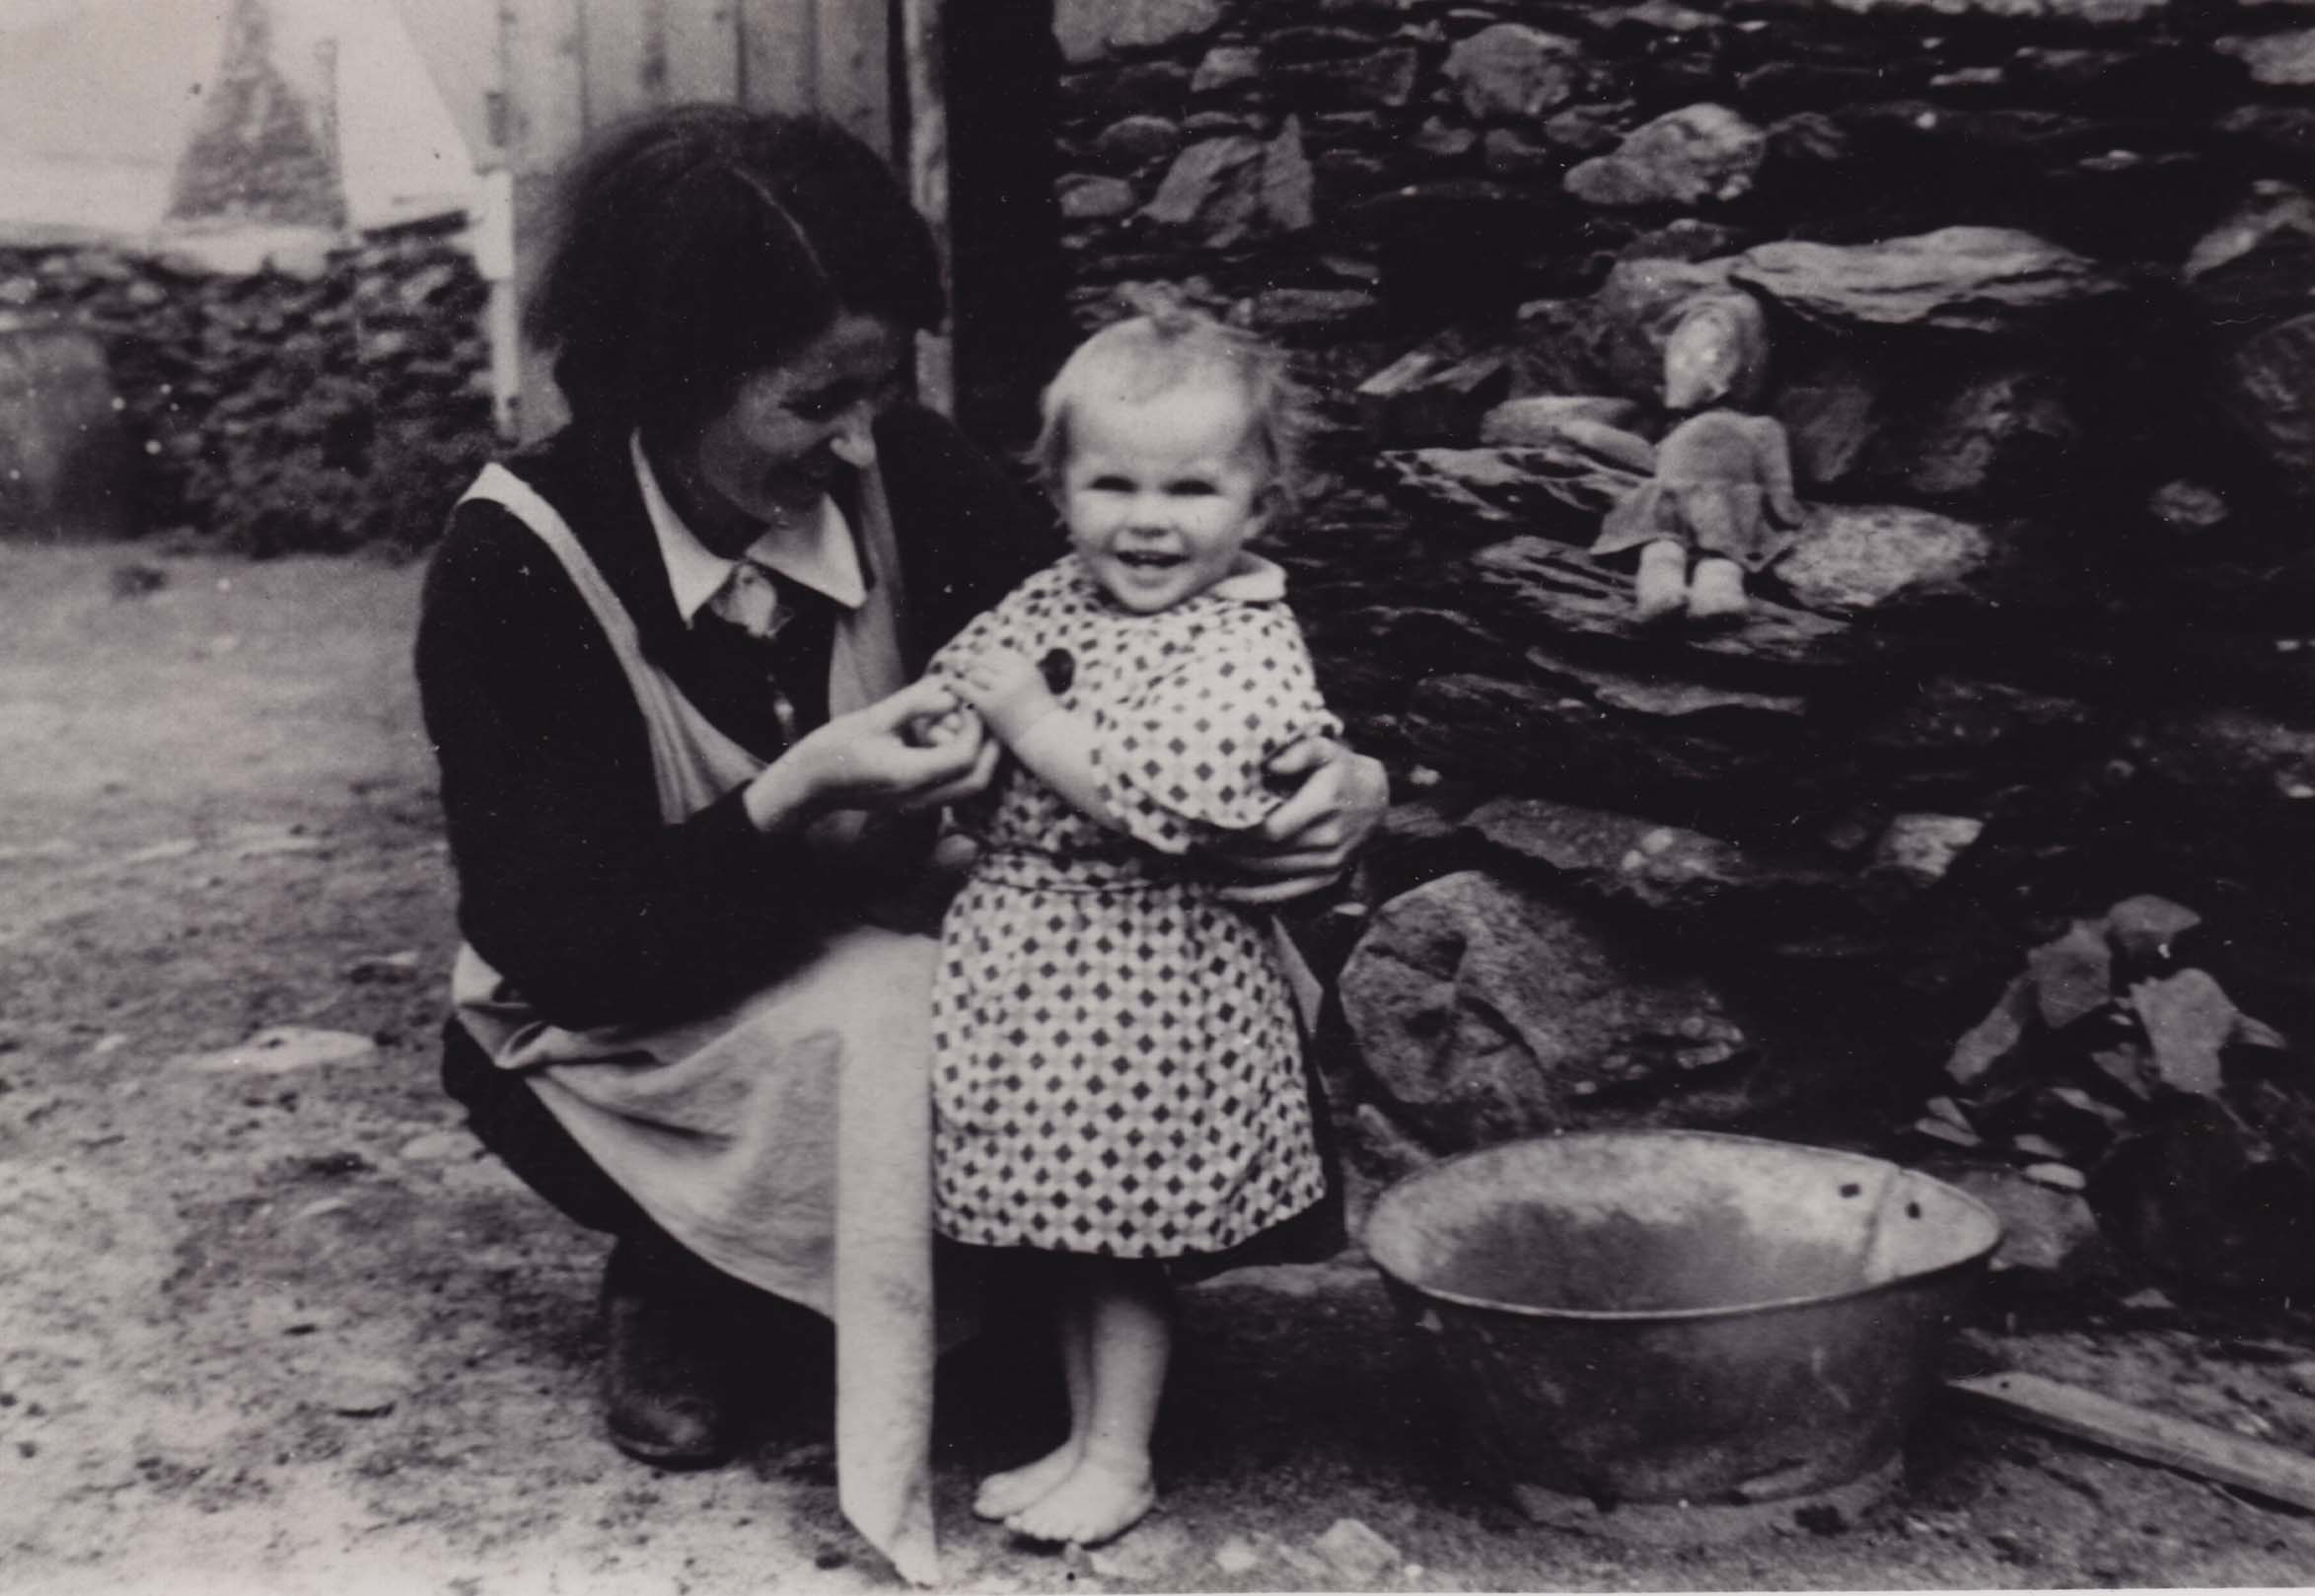 Eibhlis (Ni Shuilleabhain) Ui Chriomhthain with her daughter Niamh, late 1930s. Taken by George Chambers. Courtesy National Folklore Collection, UCD.